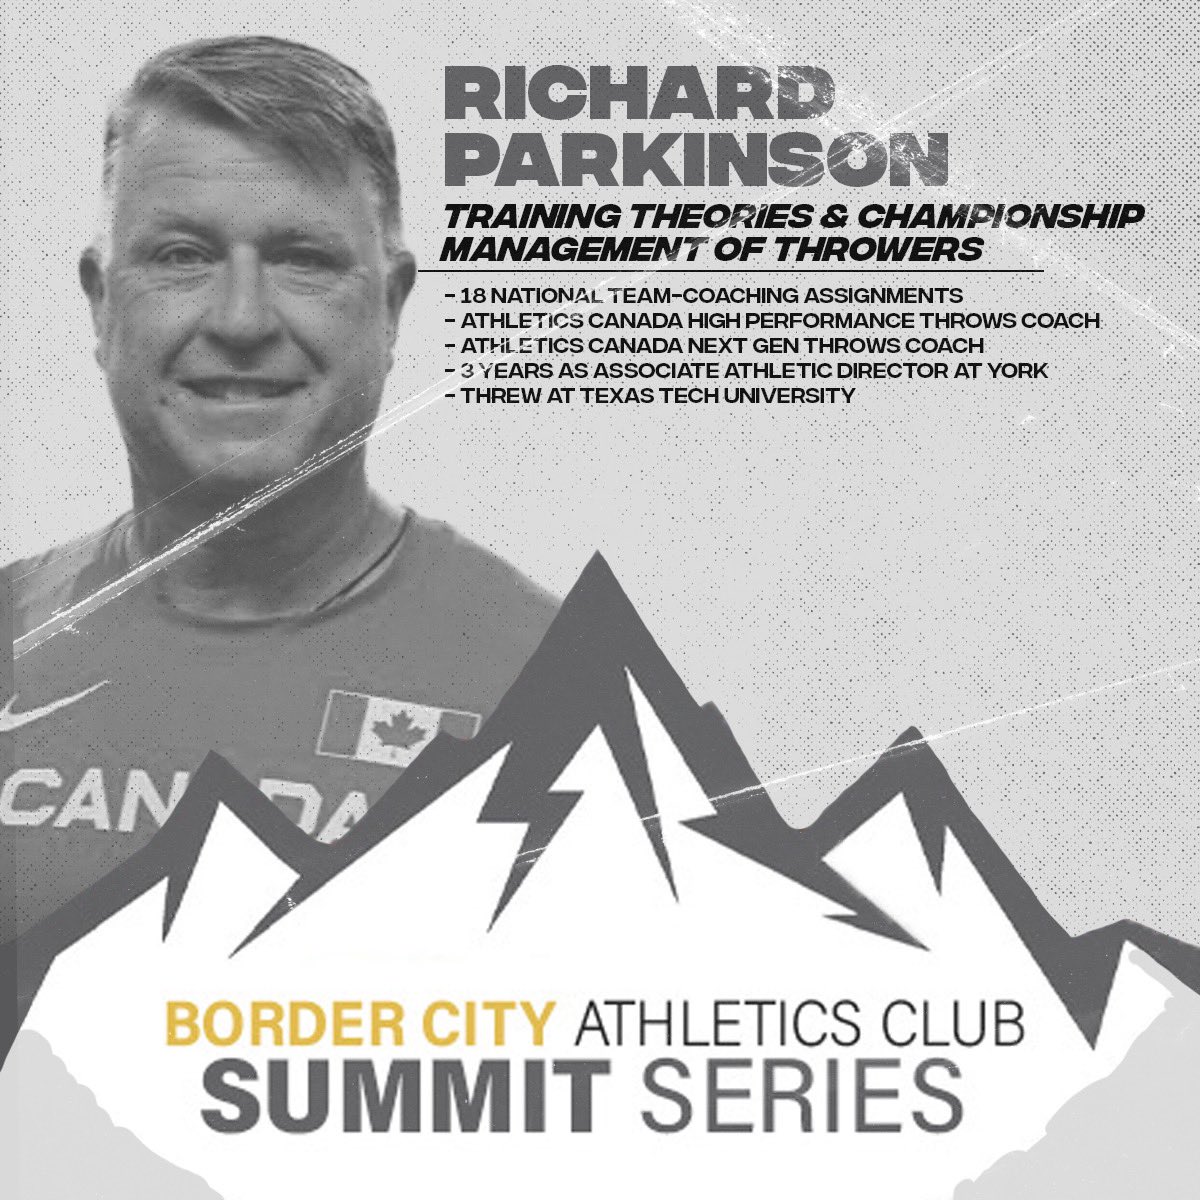 @ThrowsParkinson :Training Theories &Championship Management Of Throwers. Richard has coached at: 4 World Championships, 2 PanAmGames, 2016+2020 @Olympics , & the 2018+2022 Commonwealth Games. In 2022, he led @MittonSarah in setting a new 🇨🇦 Record (20.33m) & 4th @WCHoregon22.